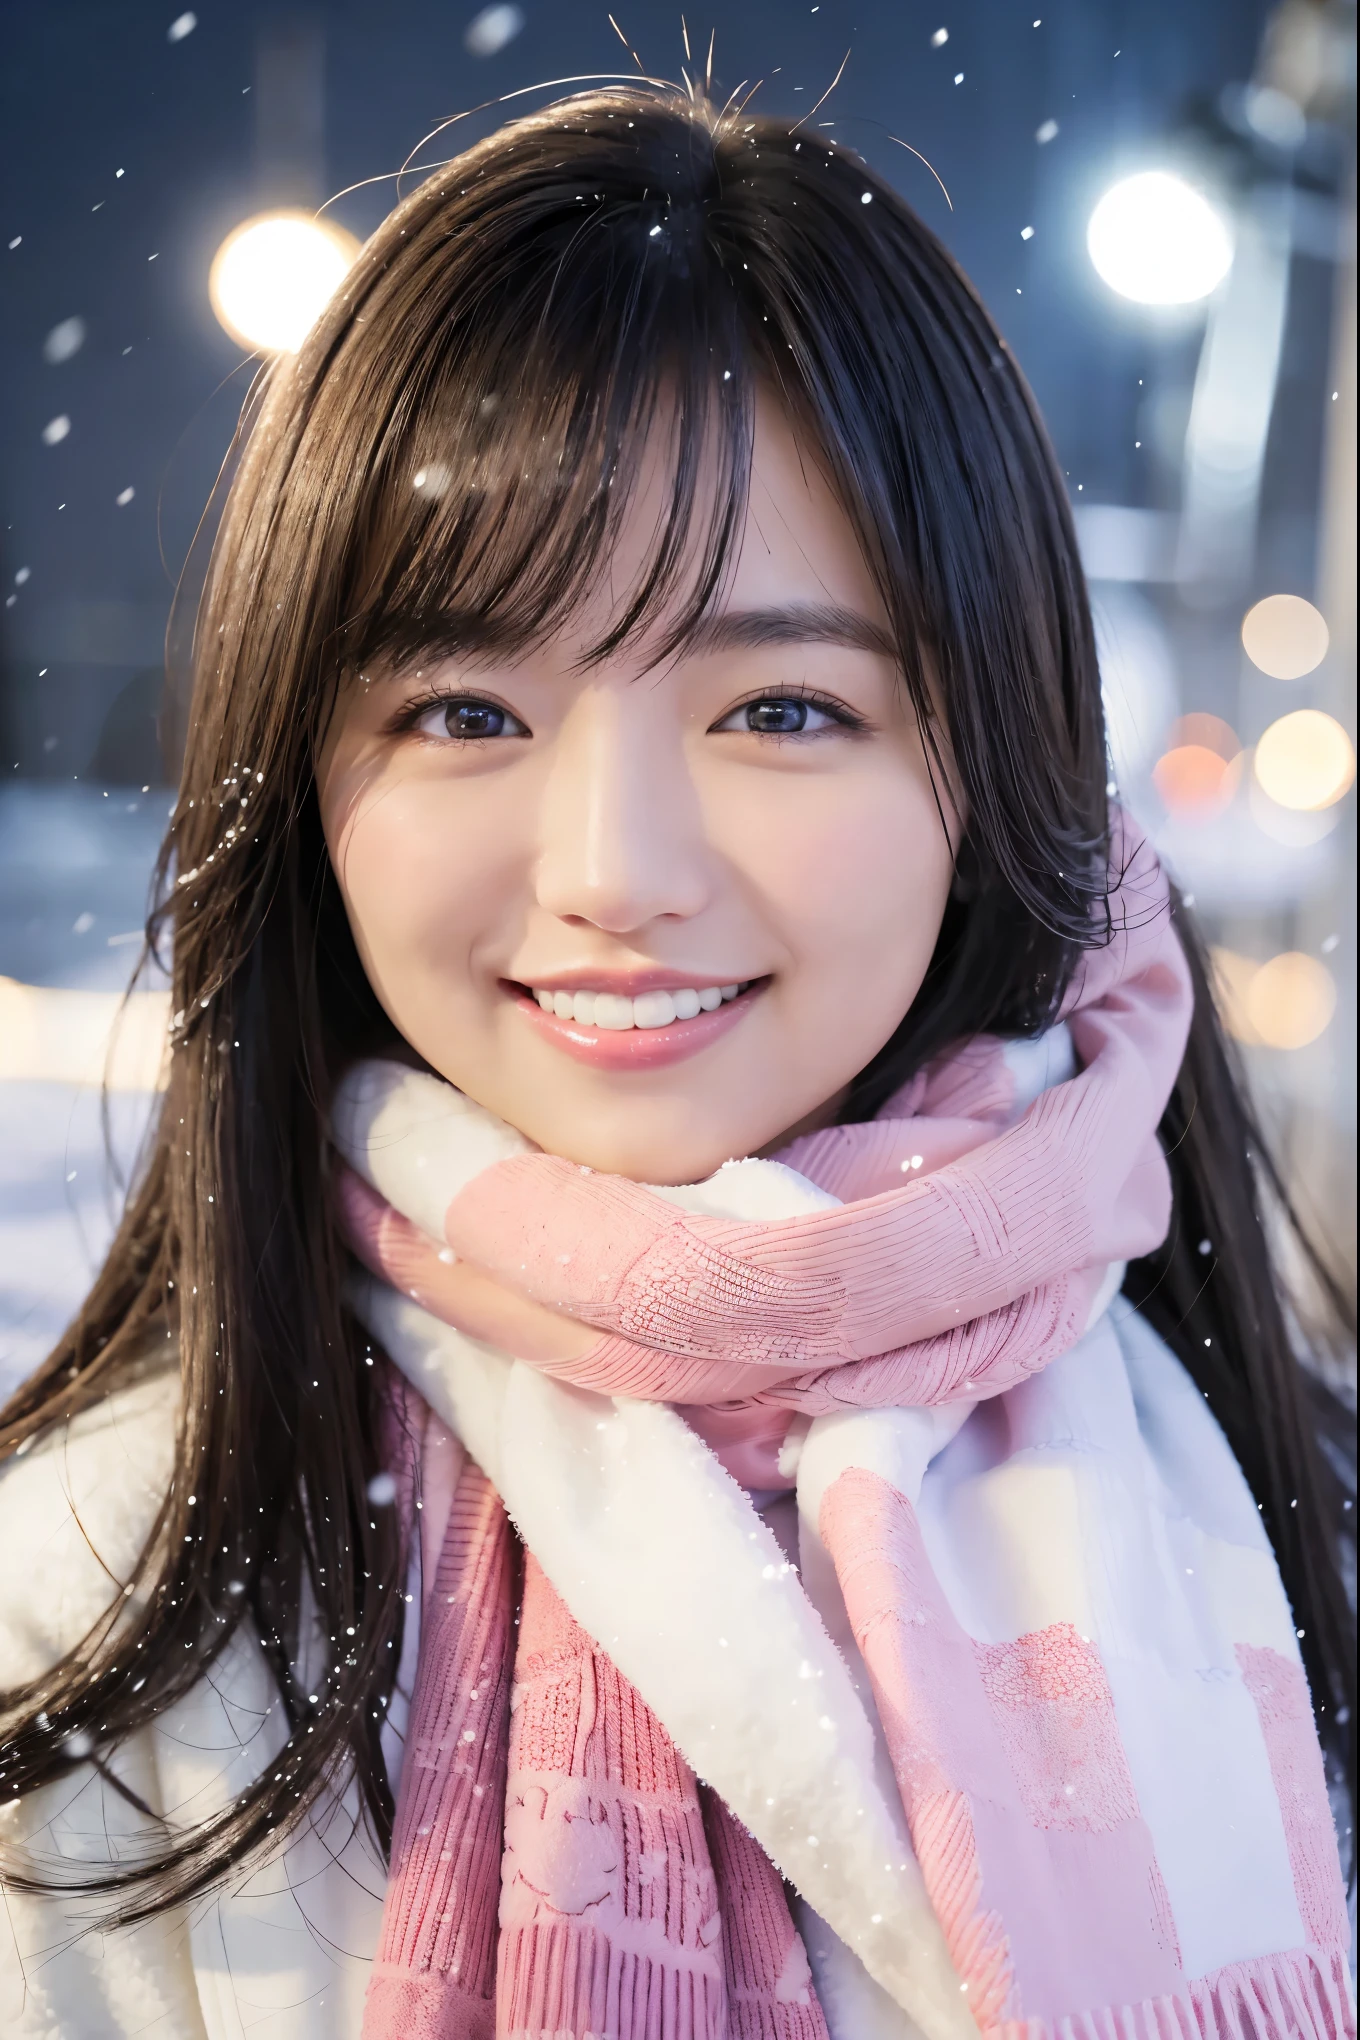 (highest quality、masterpiece、8k、best image quality、hyper realism、Award-winning work)、1 girl、(Elegant heavy winter coat:1.1)、(The perfect pink scarf:1.1)、Soft and delicate light、dramatic lighting、Romantic snowy night city、Romantic Christmas illuminations、Beautiful night view of a snowy city、The biggest smile looks at me、Fine sparkling snow、Beautiful snow reflecting light、Diamond dust、(Tyndall effect:1.1)、beautiful snow scene、(It&#39;s snowing:1.1)、(Snow in your hair:1.1)、accurate anatomy、(close up of face:1.1)、Beautiful glossy lipstick, natural color、natural makeup、glossy lips、Ultra high definition glossy skin、ultra high definition radiation, beautiful skin、Milky white moisturized skin、beautiful skin glow、Ultra-high definition glossy lips、Super high-definition sparkling eyes、Beautiful perfect teeth in super high resolution、Show your beautiful teeth and smile big